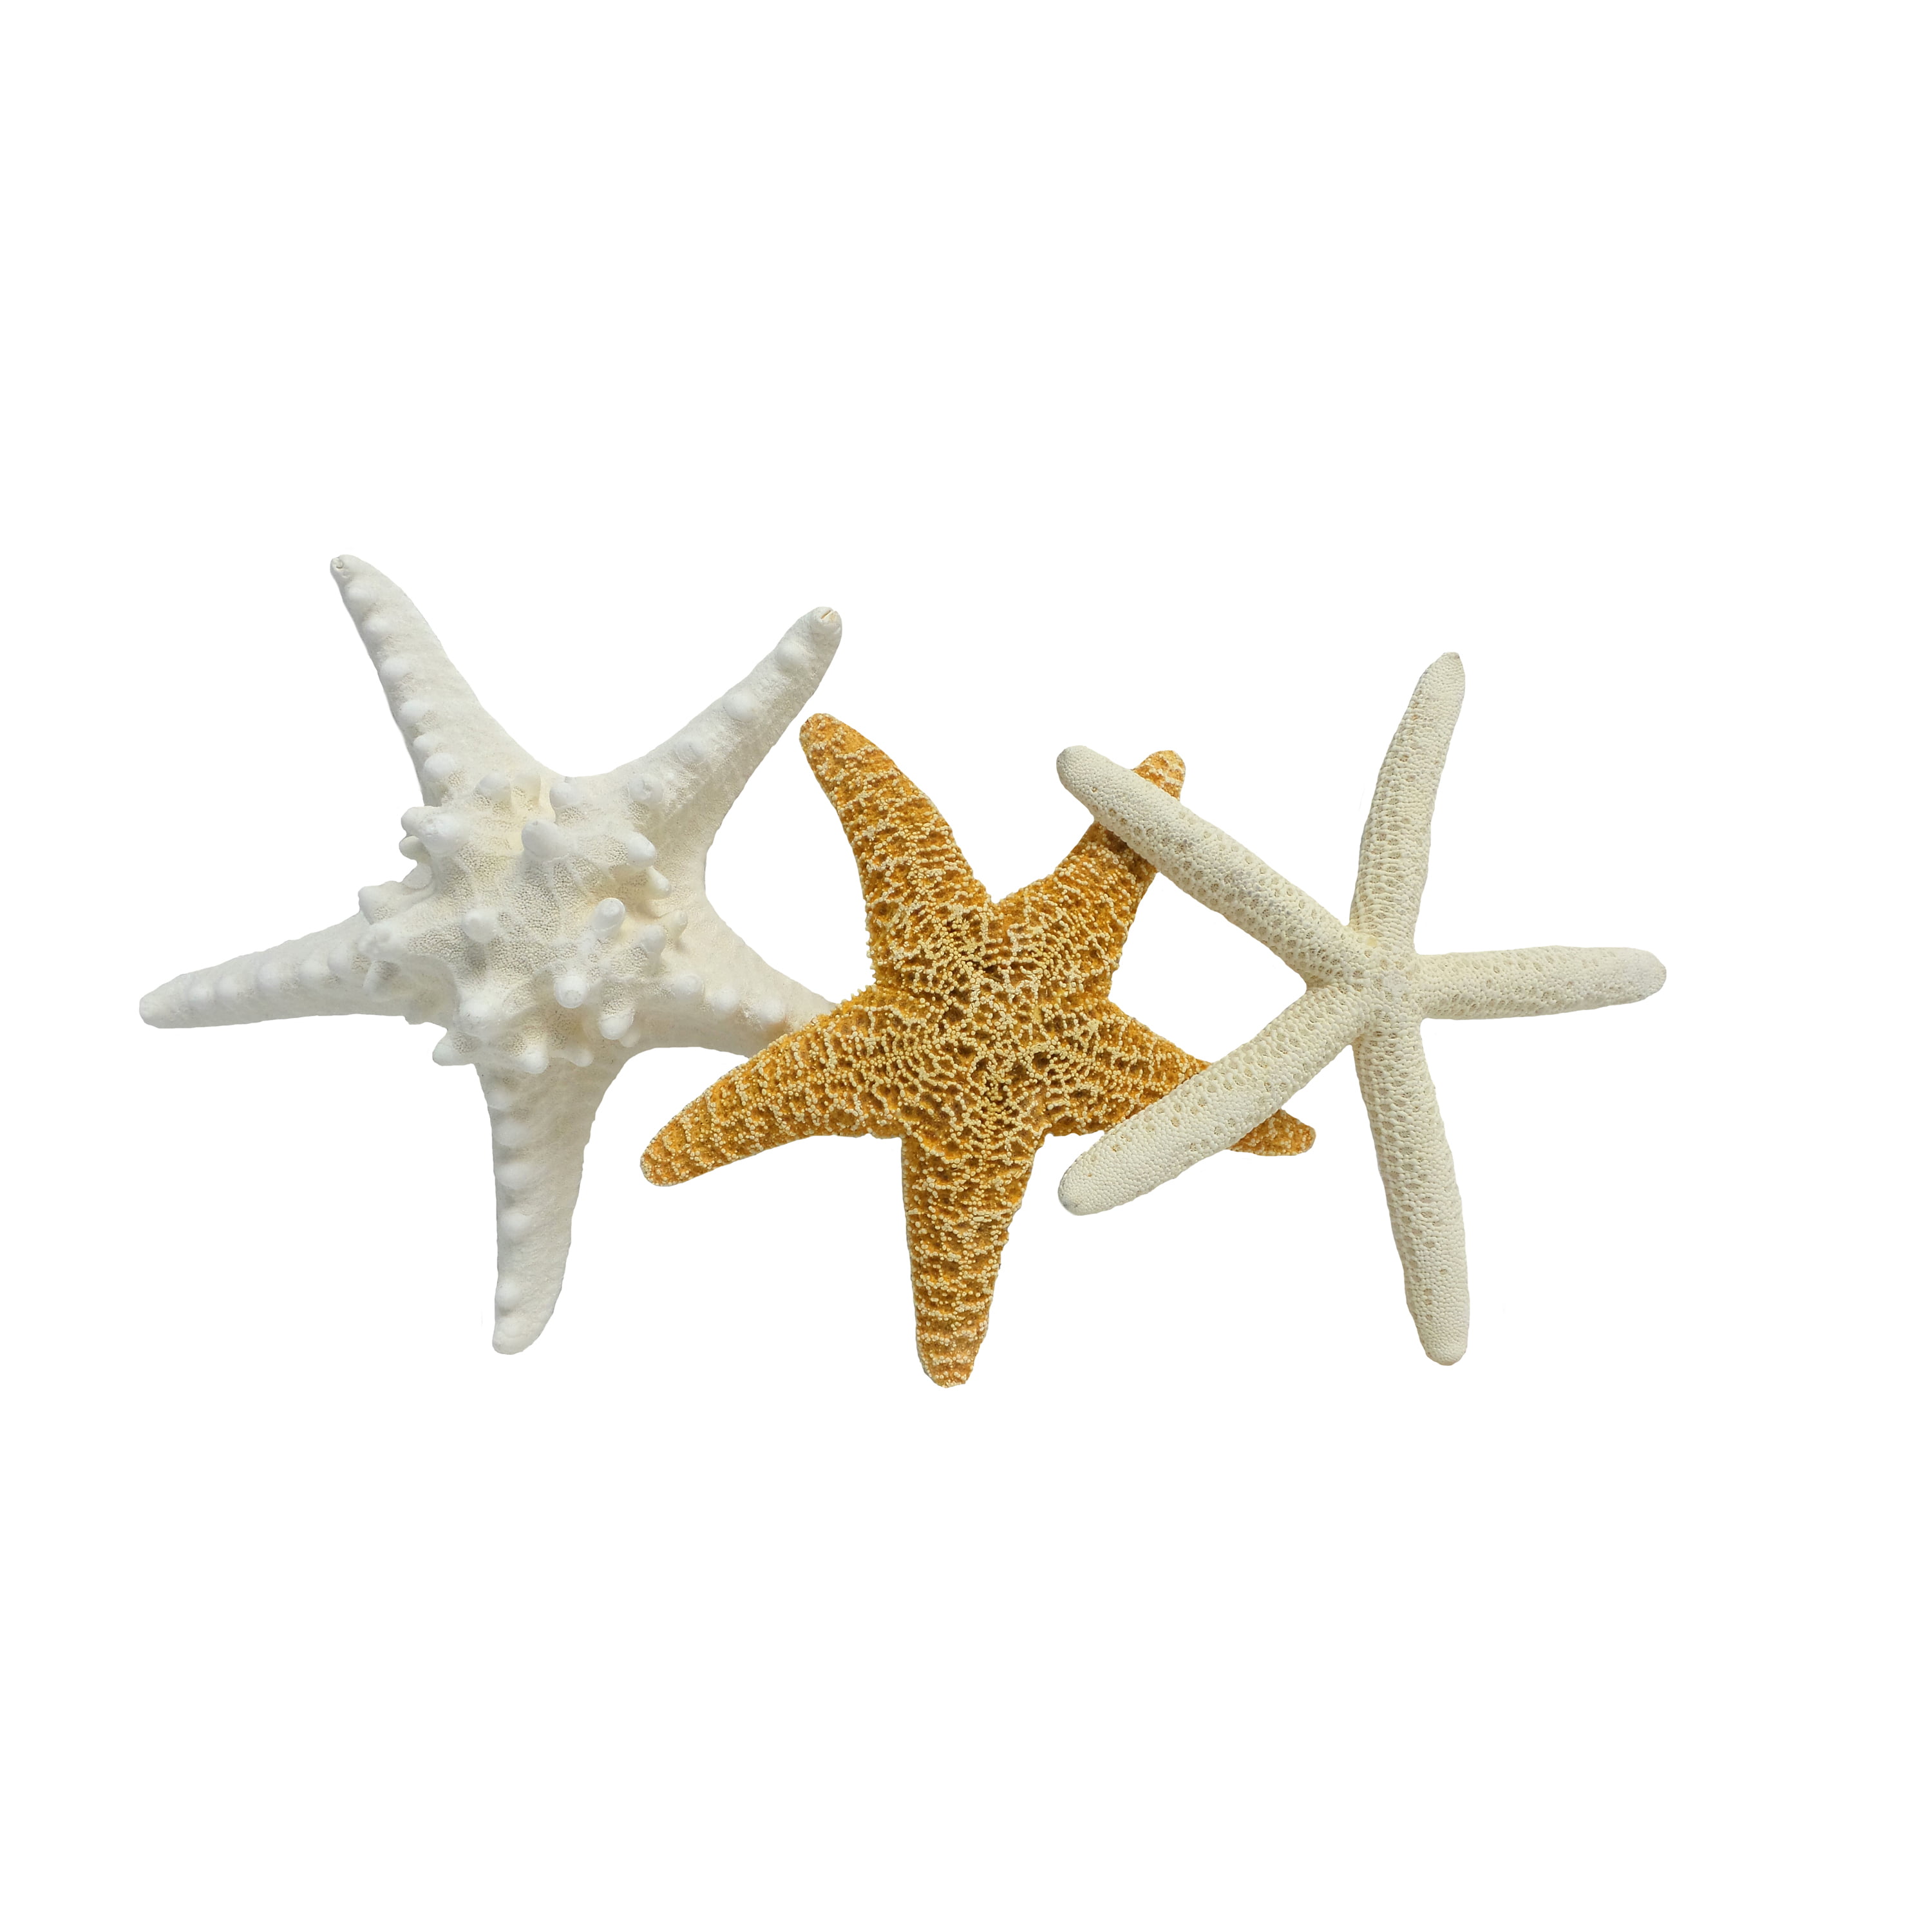 BEACH SEASHELLS STARFISH  SET OF 4 COASTERS RUBBER WITH FABRIC TOP 